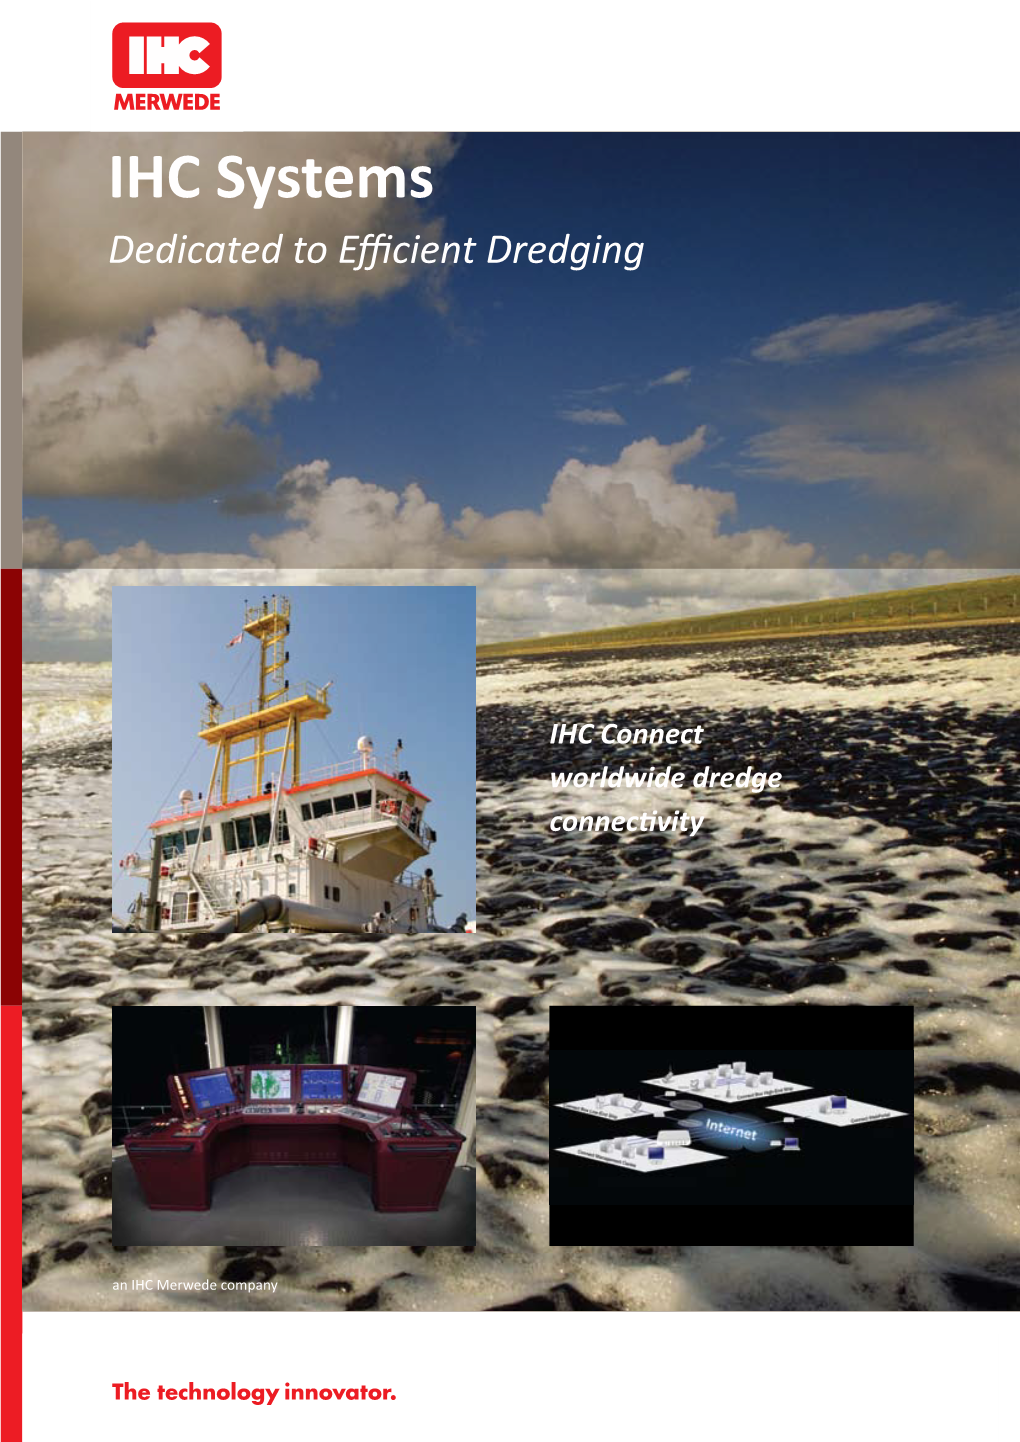 IHC Systems Dedicated to Efficient Dredging